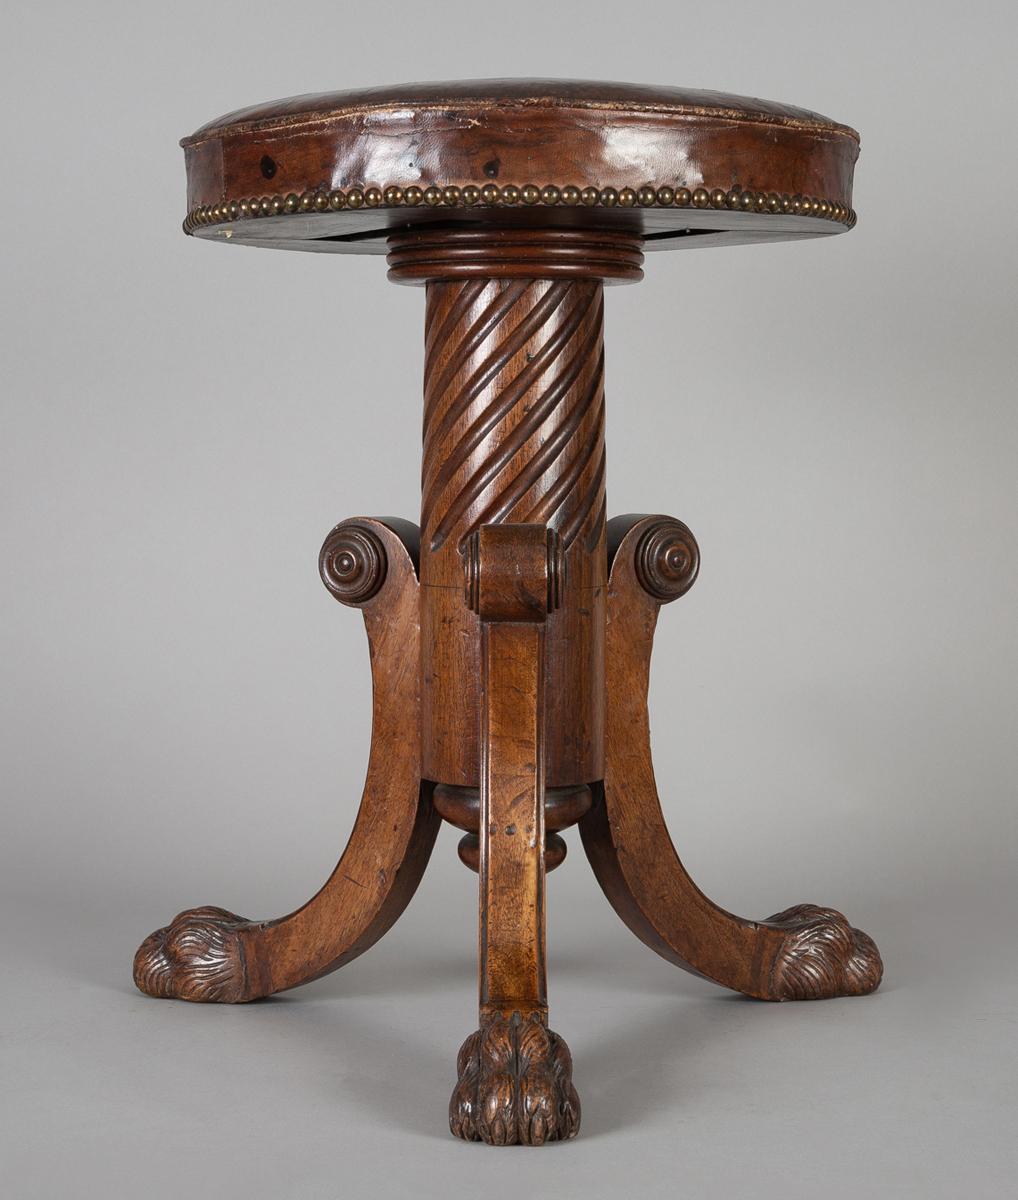 Regency mahogany adjustable revolving piano stool on tripod base with spiral carved pedestal terminating in carved finial, the C-scroll tripod legs ending in carved paw feet with the seat covered in the original morocco leather with brass nail heads.